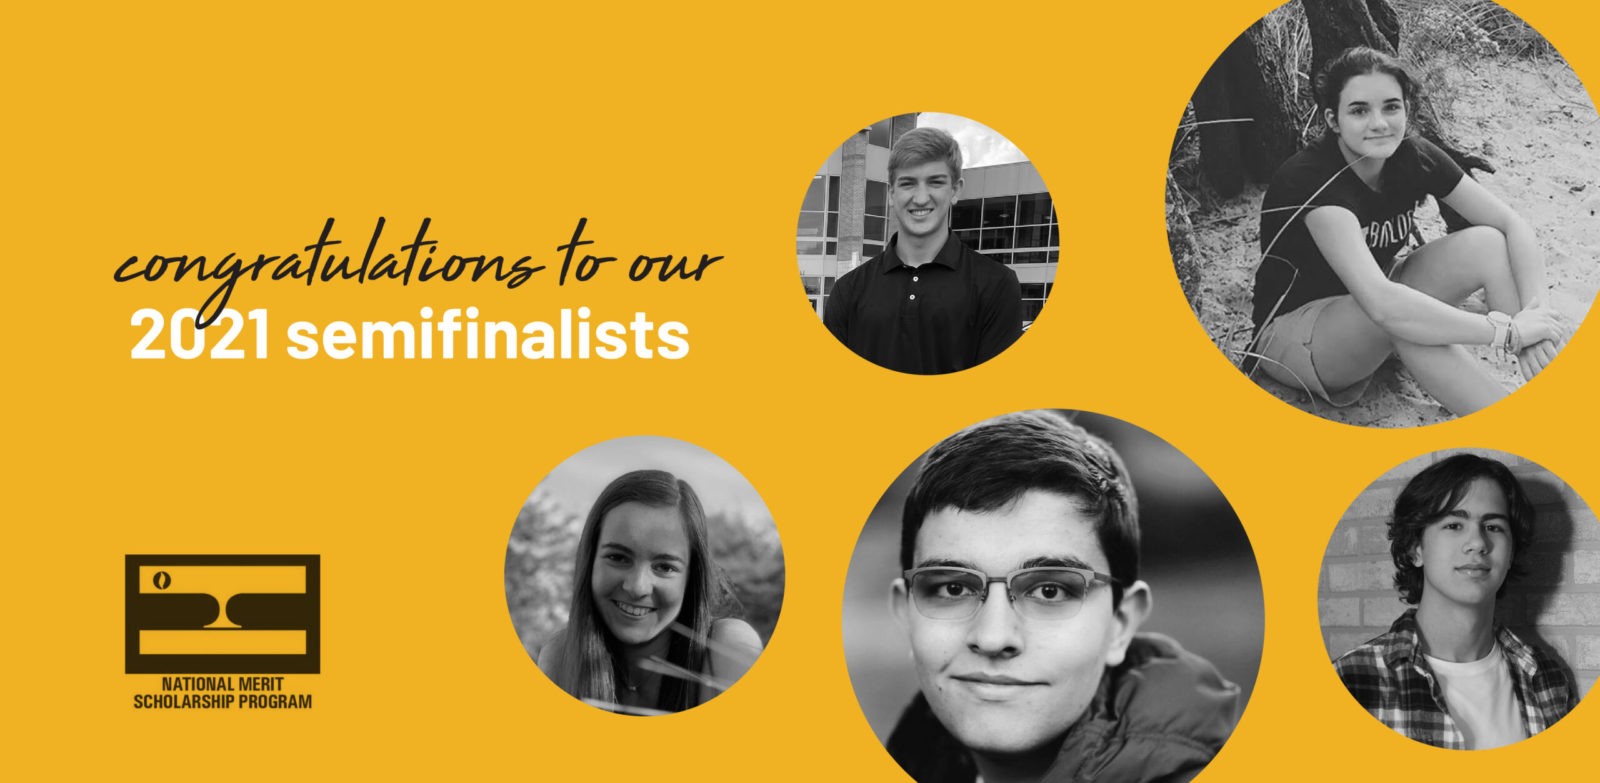 Congratulations to our 2021 National Merit Semifinalists!